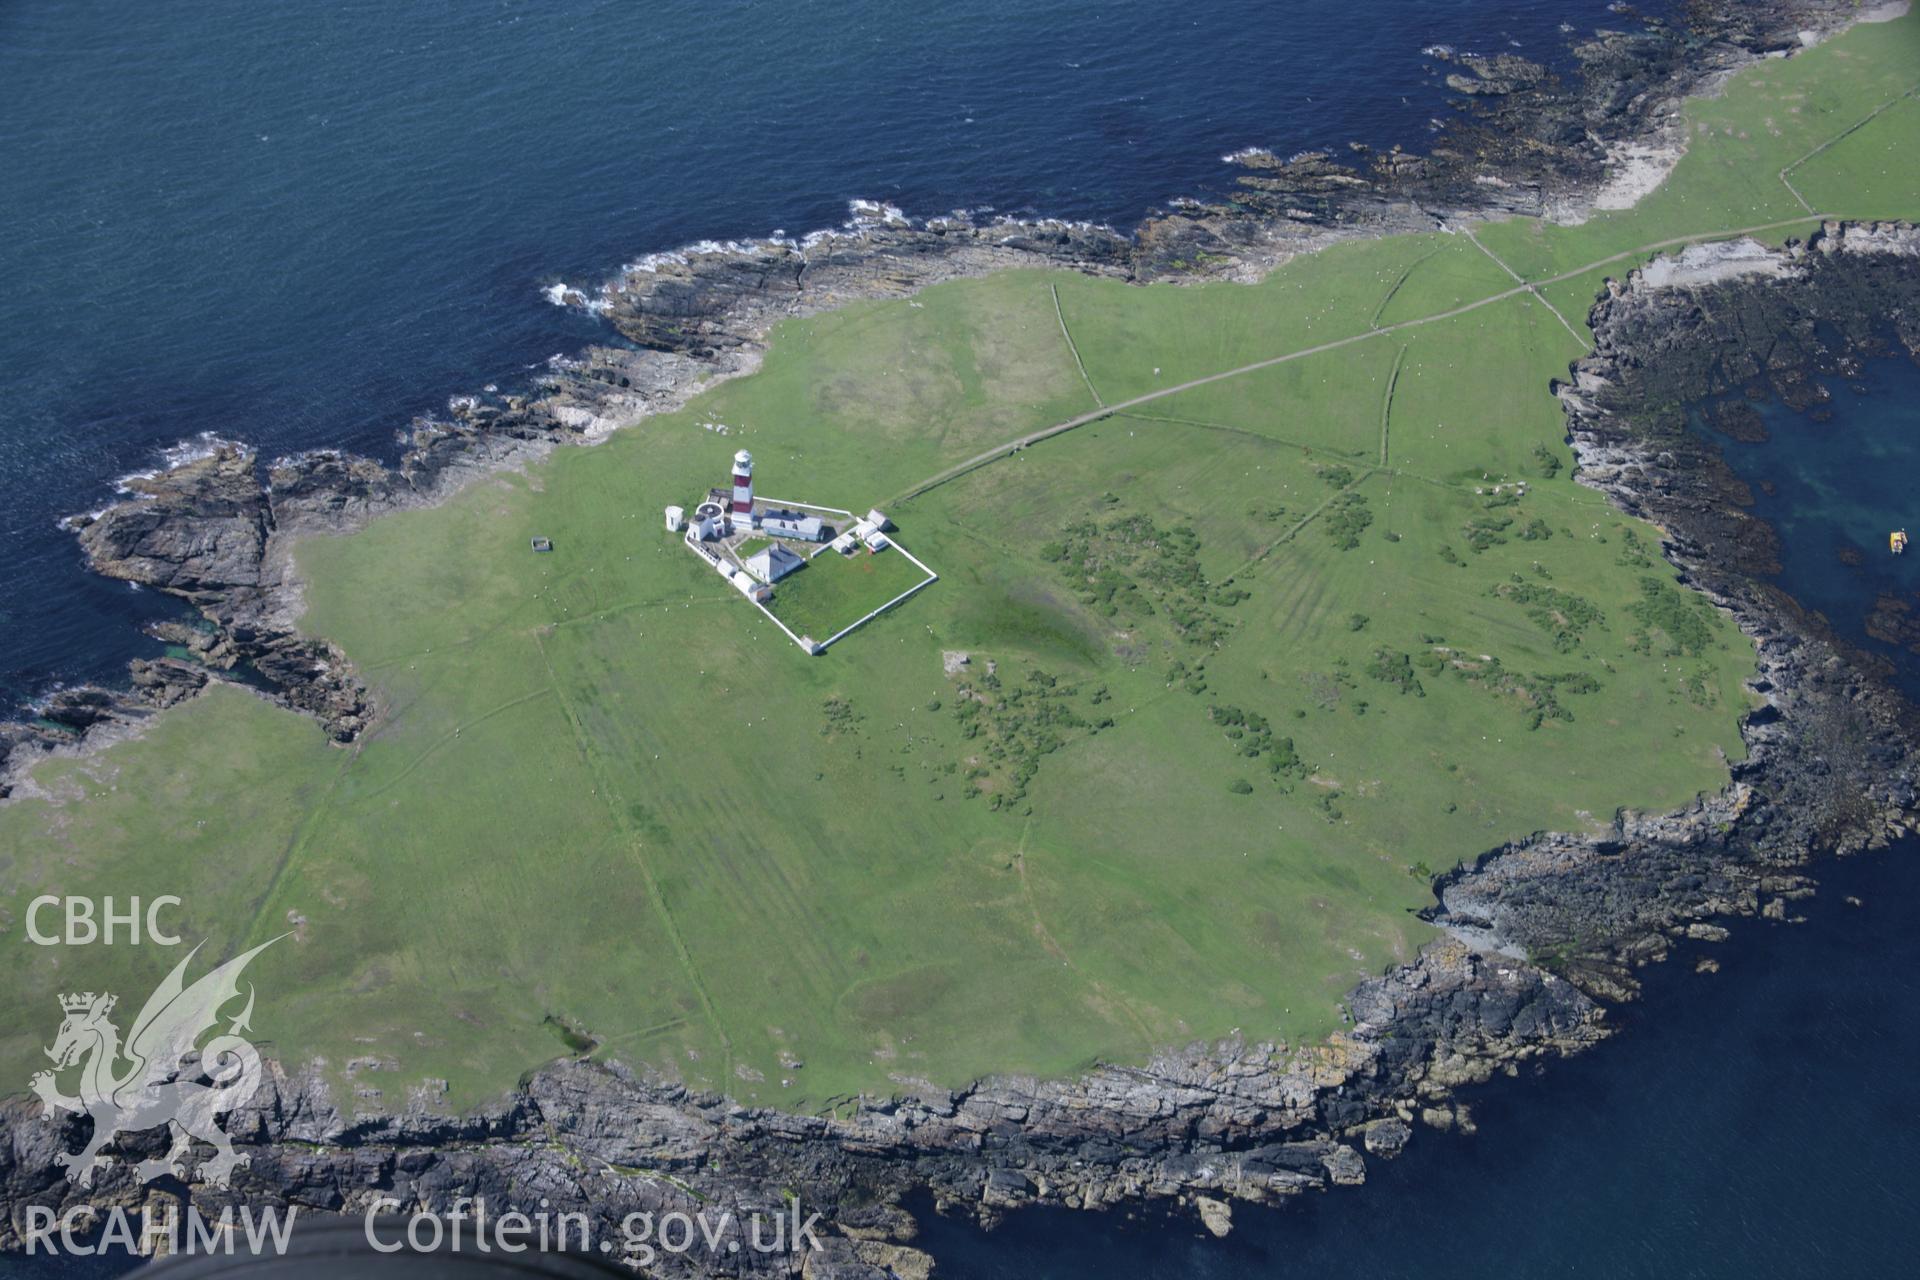 RCAHMW colour oblique aerial photograph of Bardsey Island Lighthouse from the south-east. Taken on 14 June 2006 by Toby Driver.